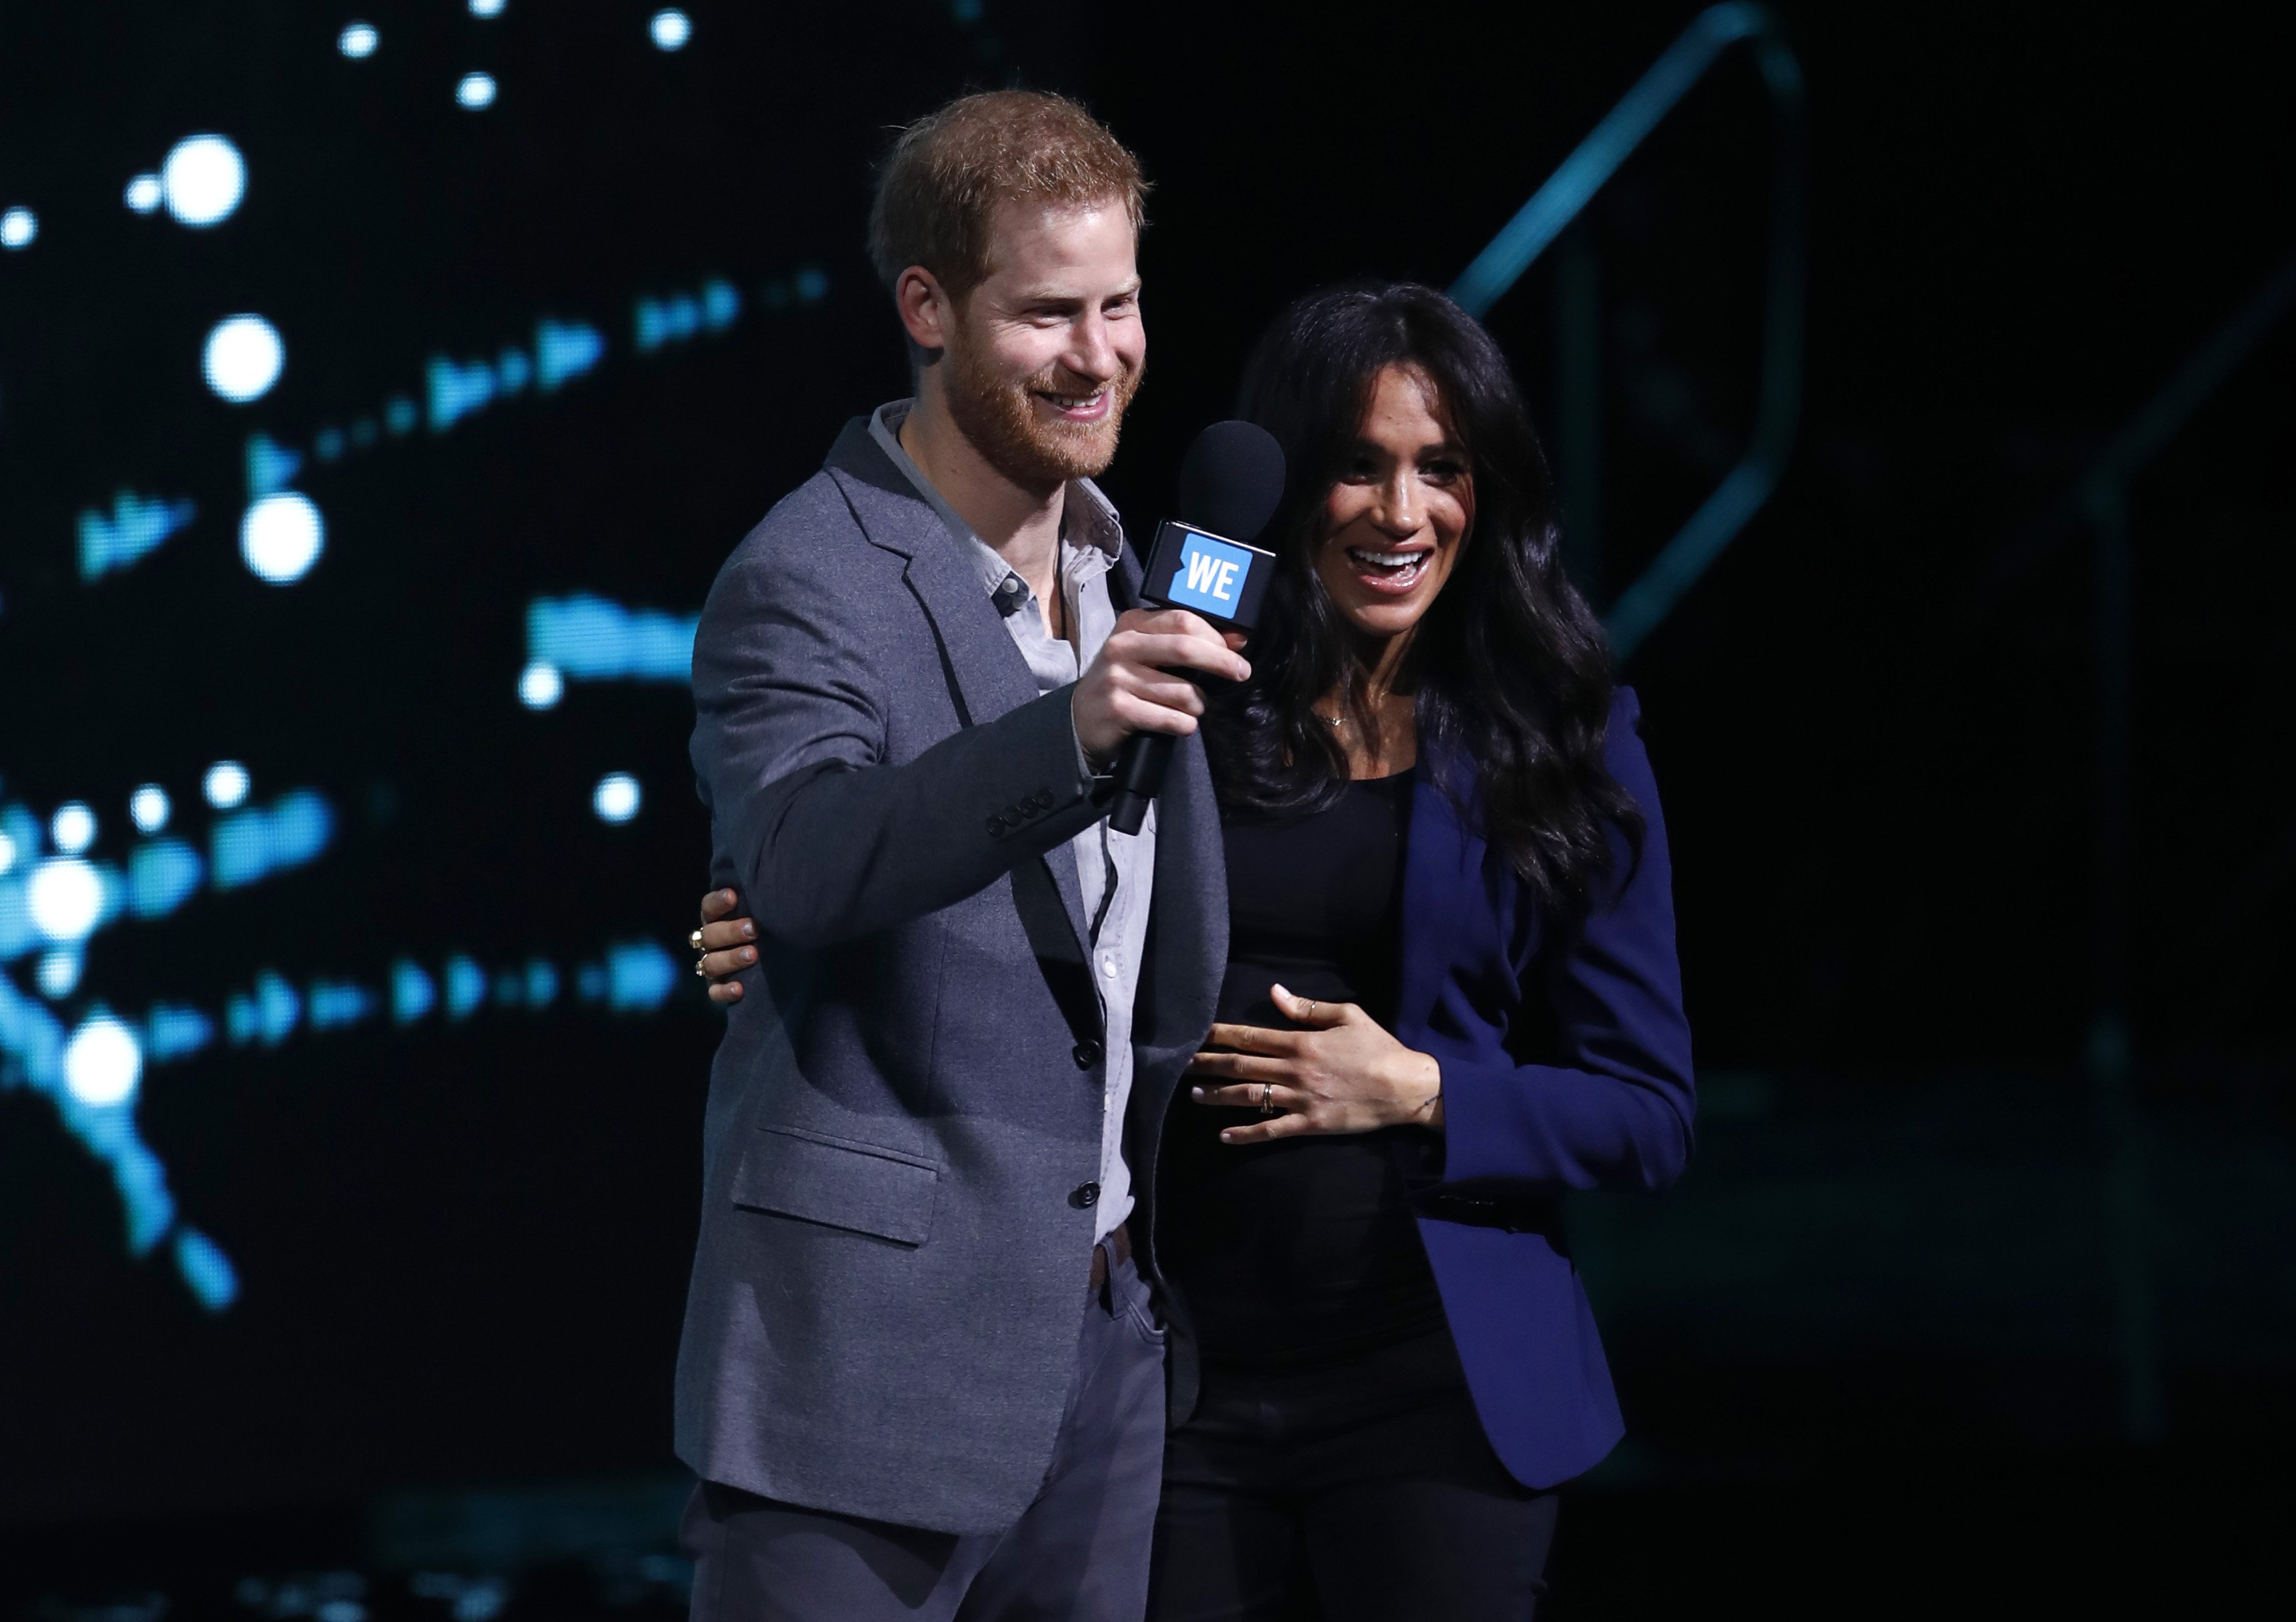 Prince Harry and Meghan Markle speak on stage during WE Day UK 2019 at The SSE Arena on March 06, 2019 in London, England | Photo: Getty Images